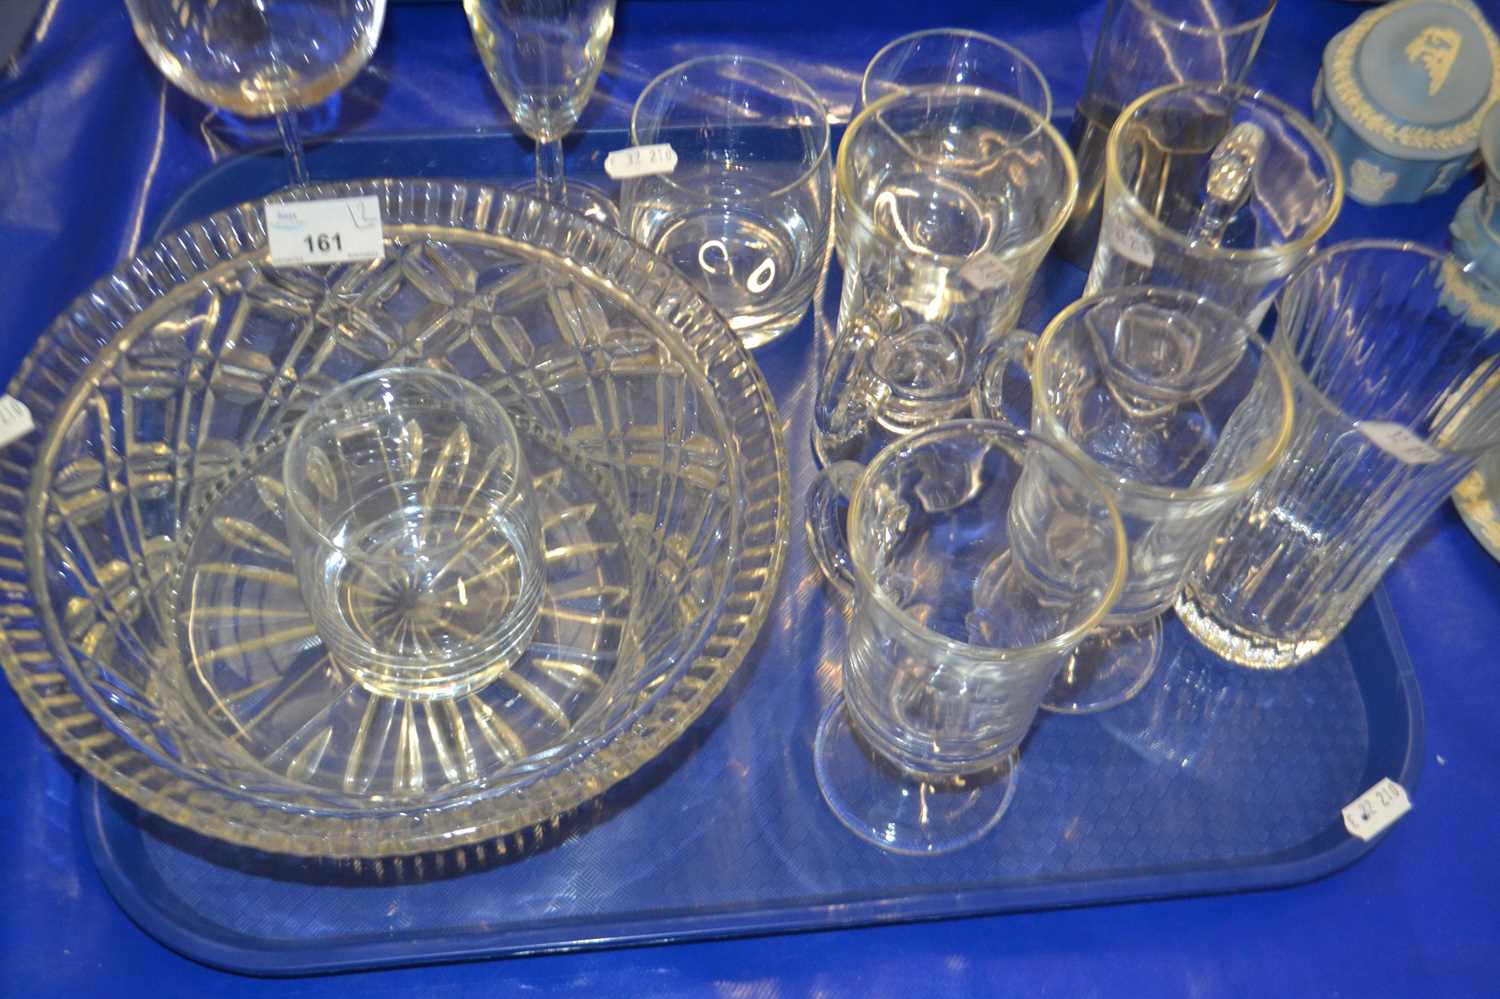 Two trays of various modern drinking glasses